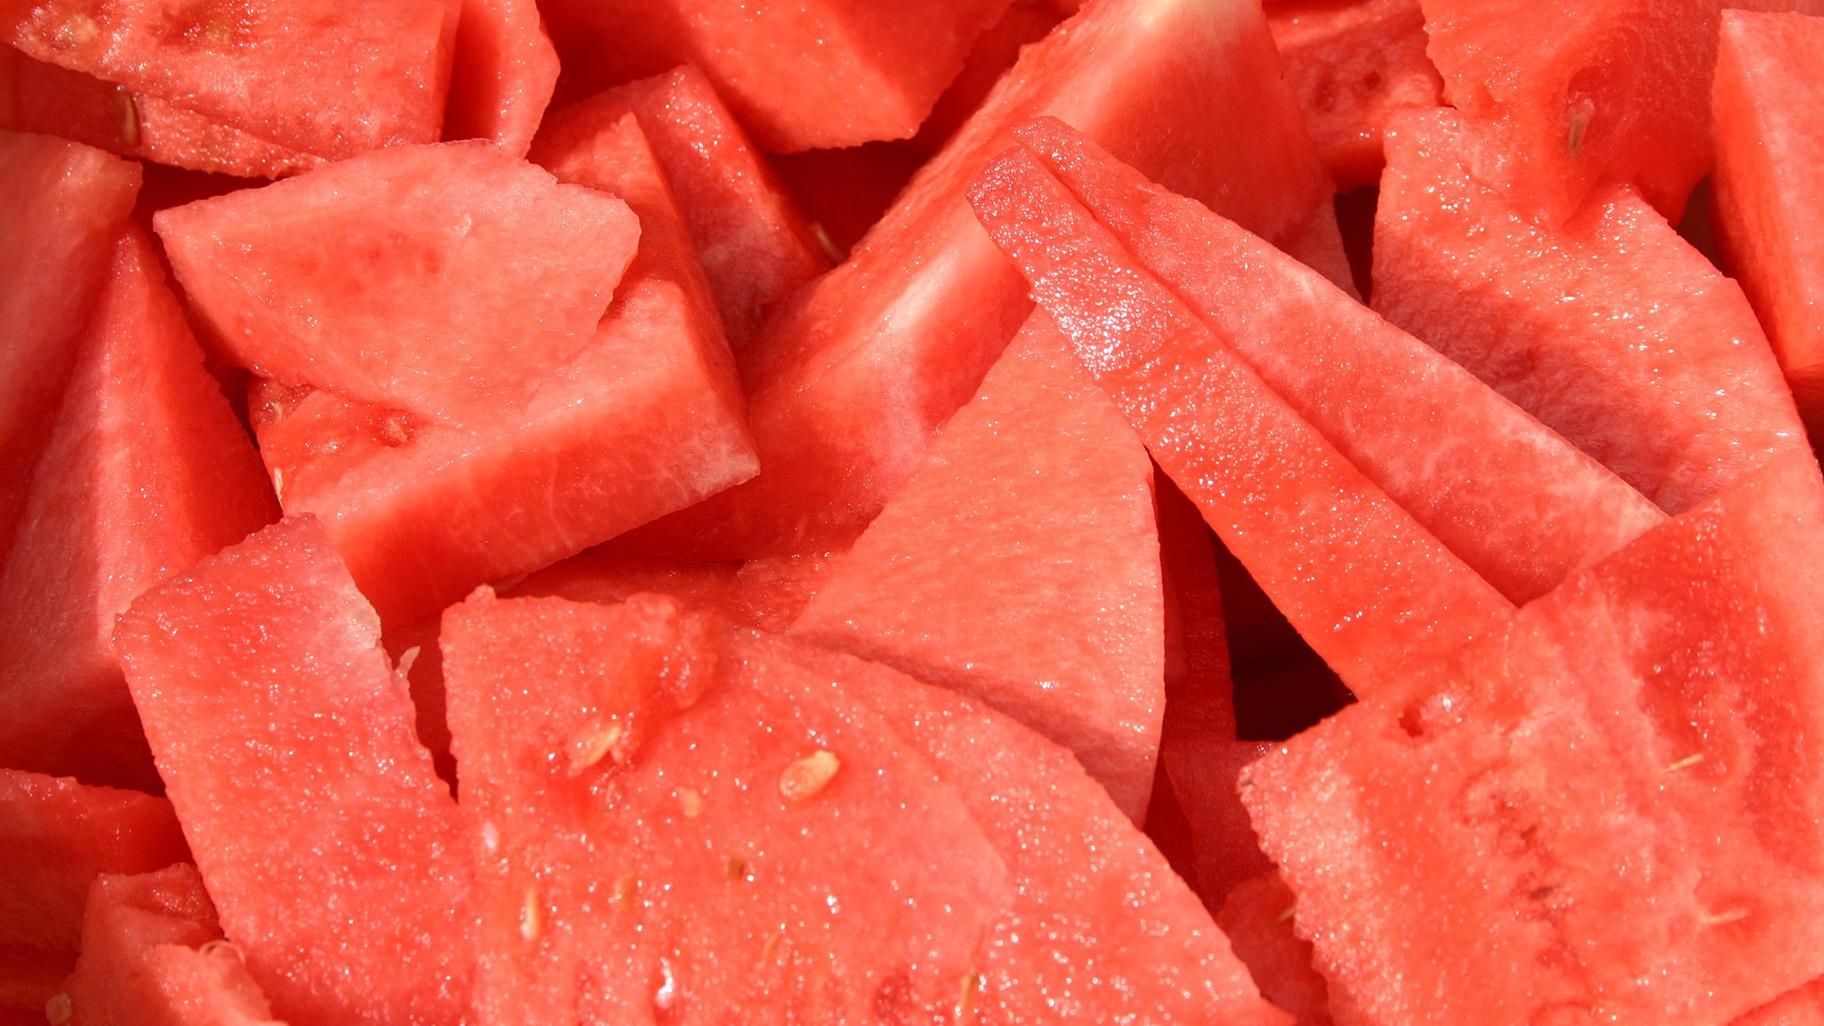 Pre-cut watermelon produced by Indianapolis-based Caito Foods, LLC has been linked to a salmonella outbreak in nine states, including Illinois. (Spudaitis / Pixabay)